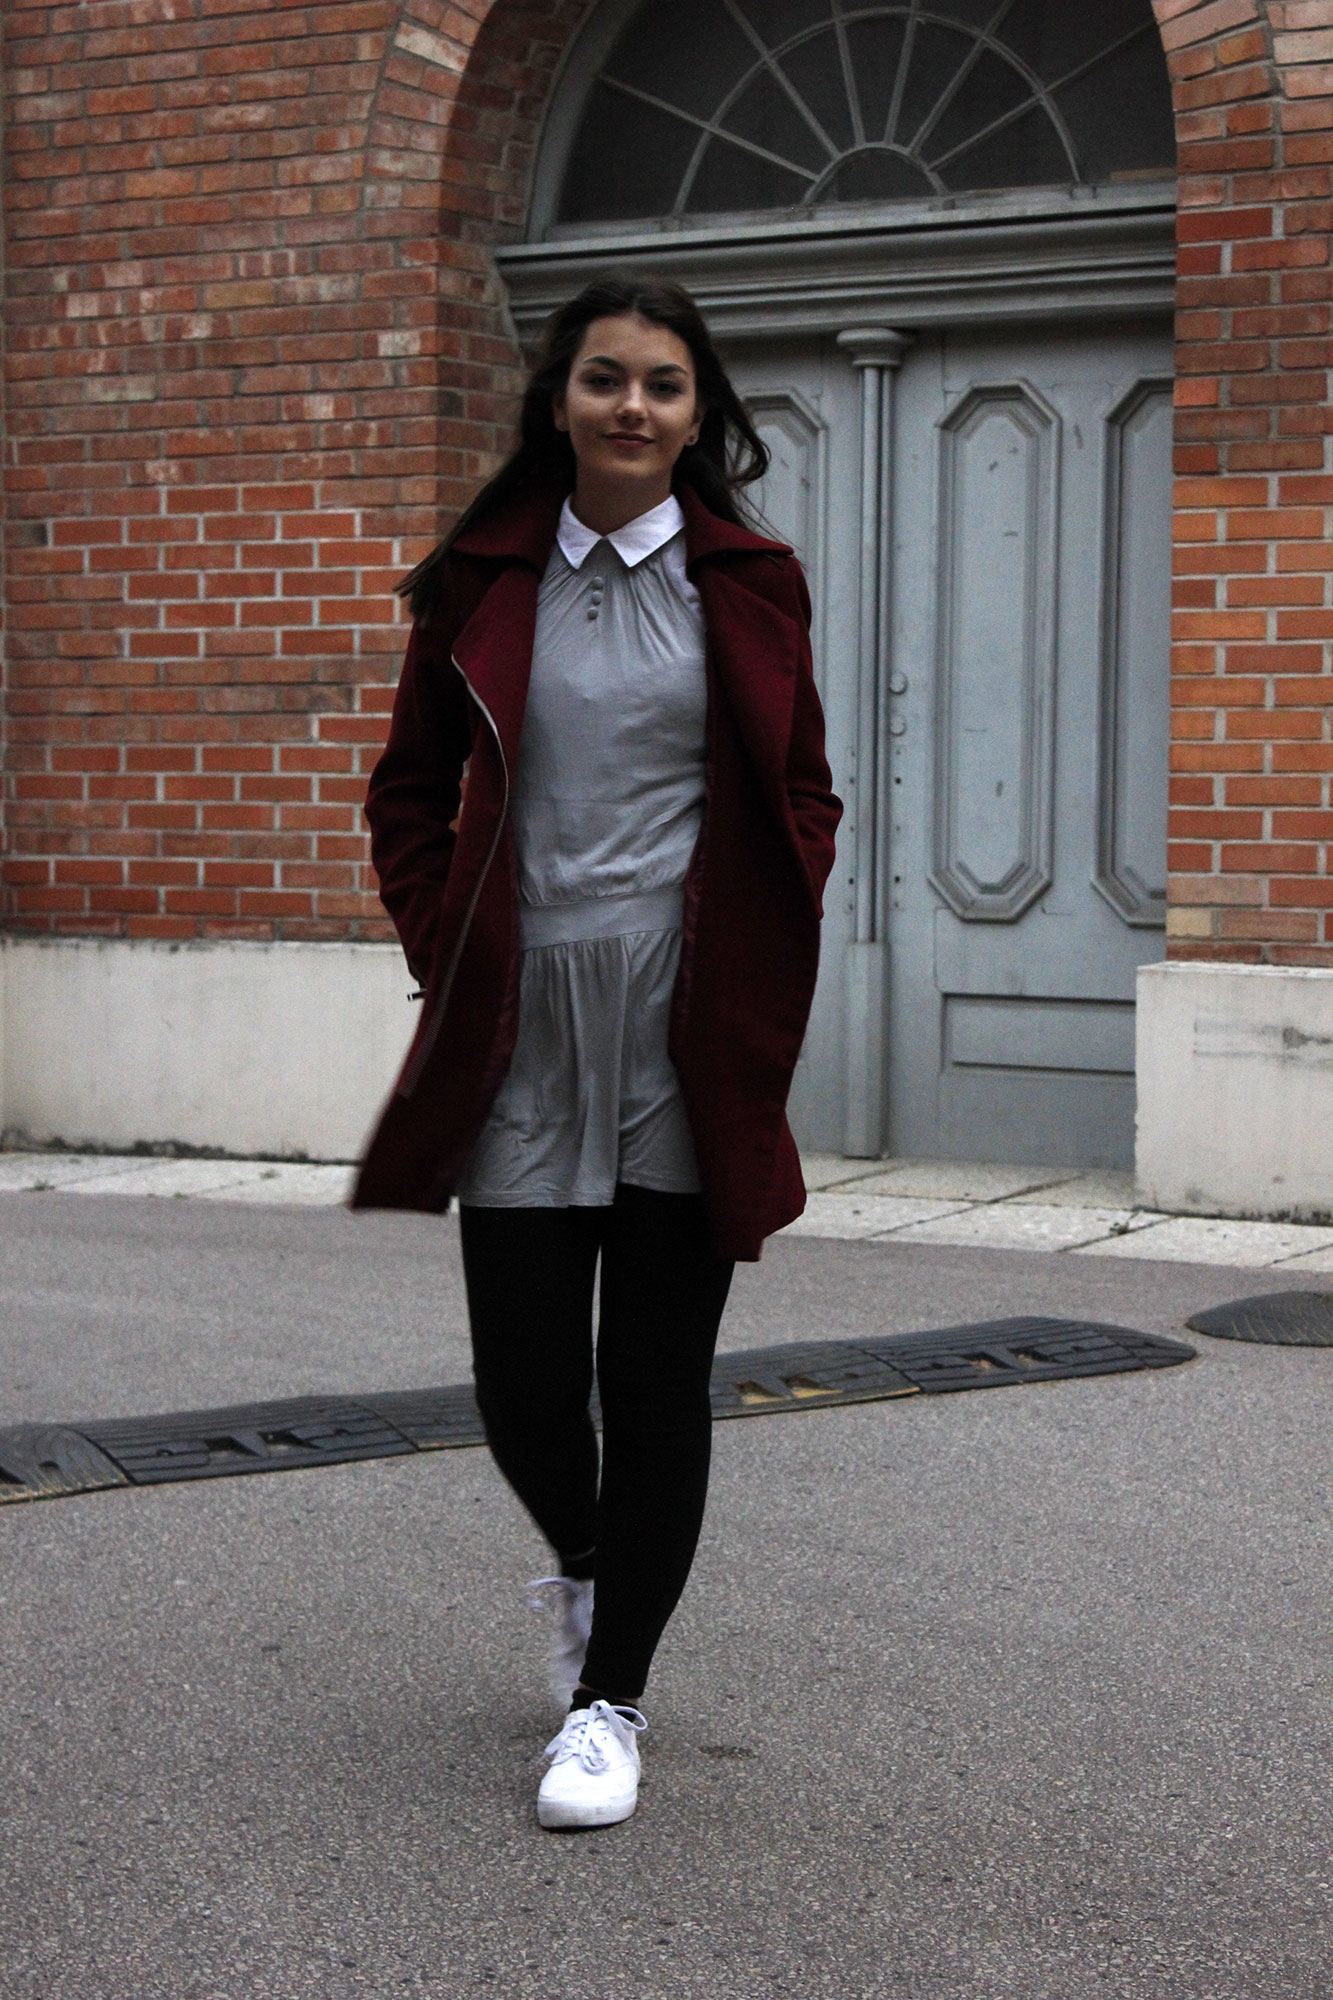 Dorie walking, wearing a red coat, grey dress, black legging and white shoes